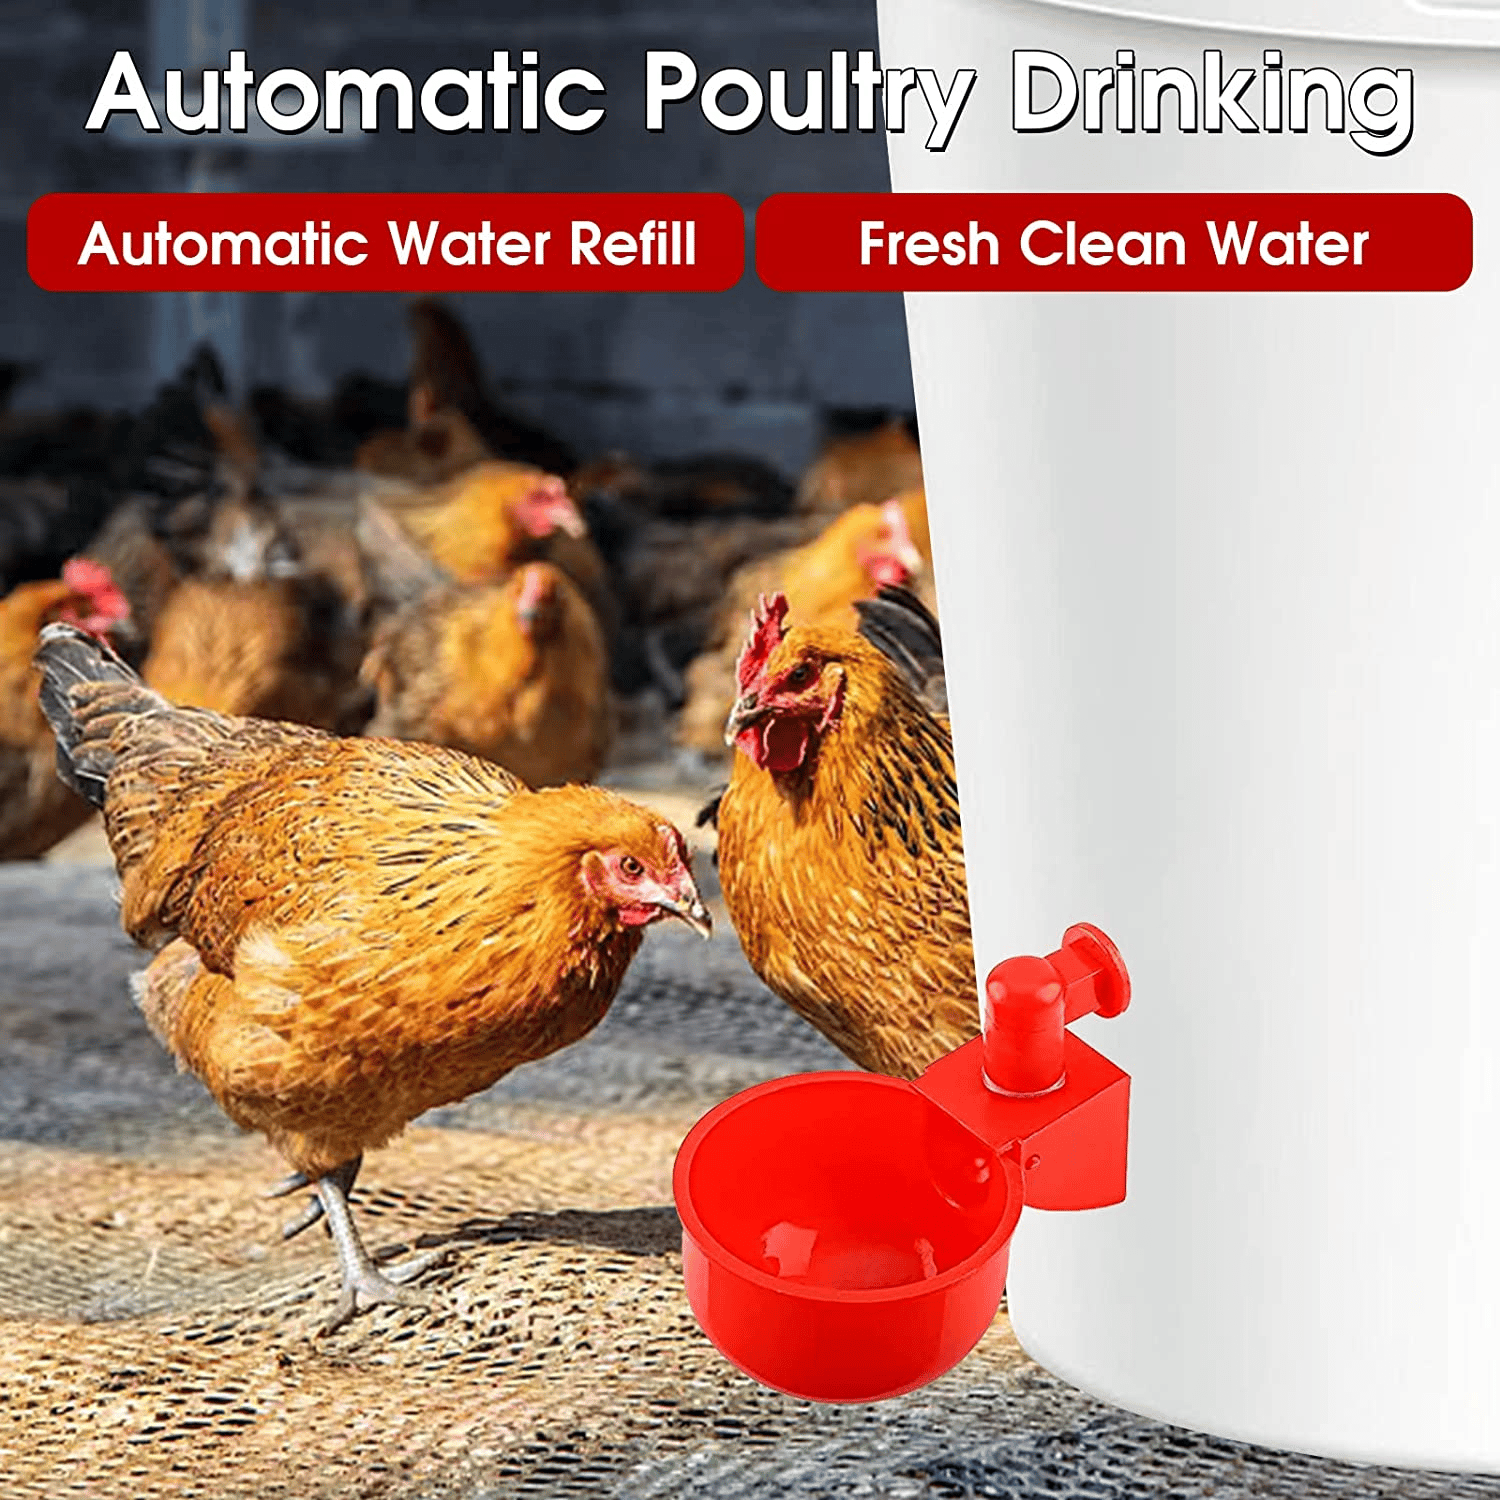 (⚡Flash Sale Today - 49% OFF) 6PCS/SET Automatic Poultry Drinking Bowl - Buy 2 Get 1 Free